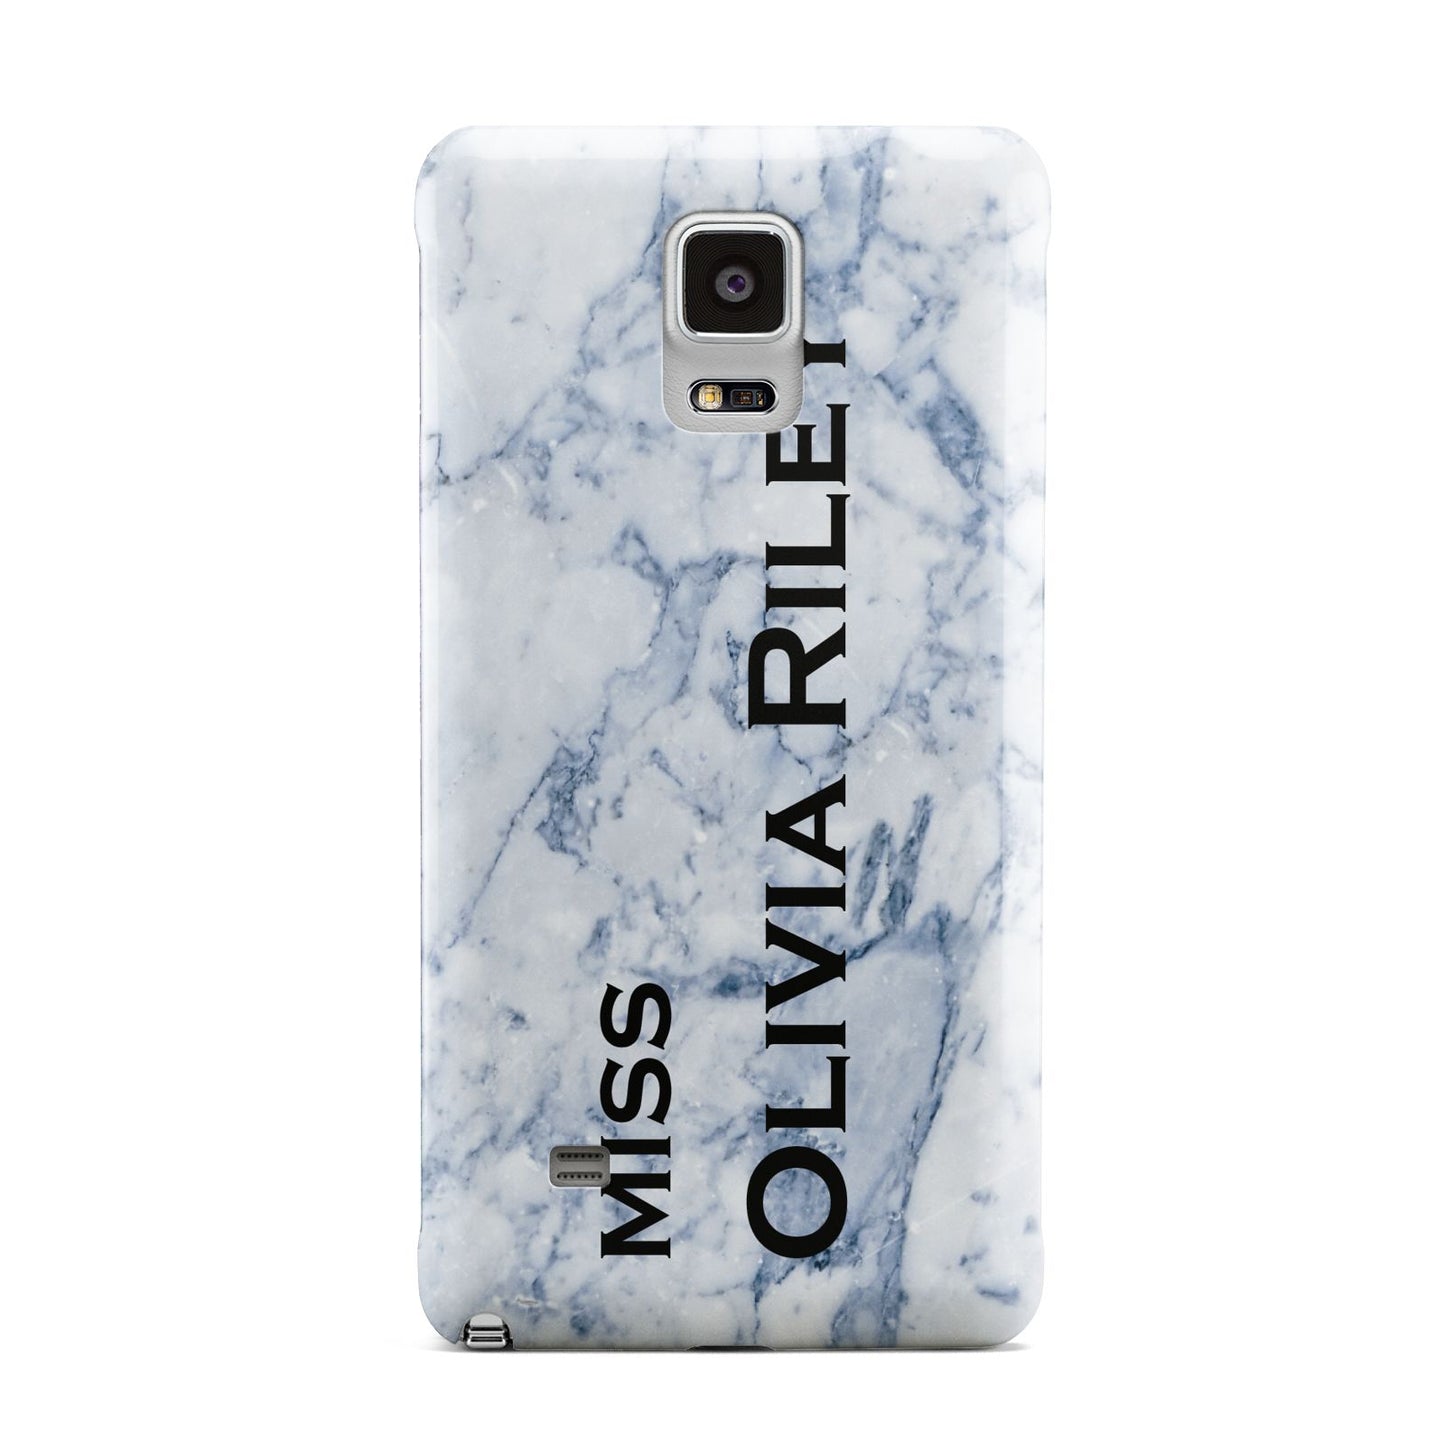 Full Name Grey Marble Samsung Galaxy Note 4 Case